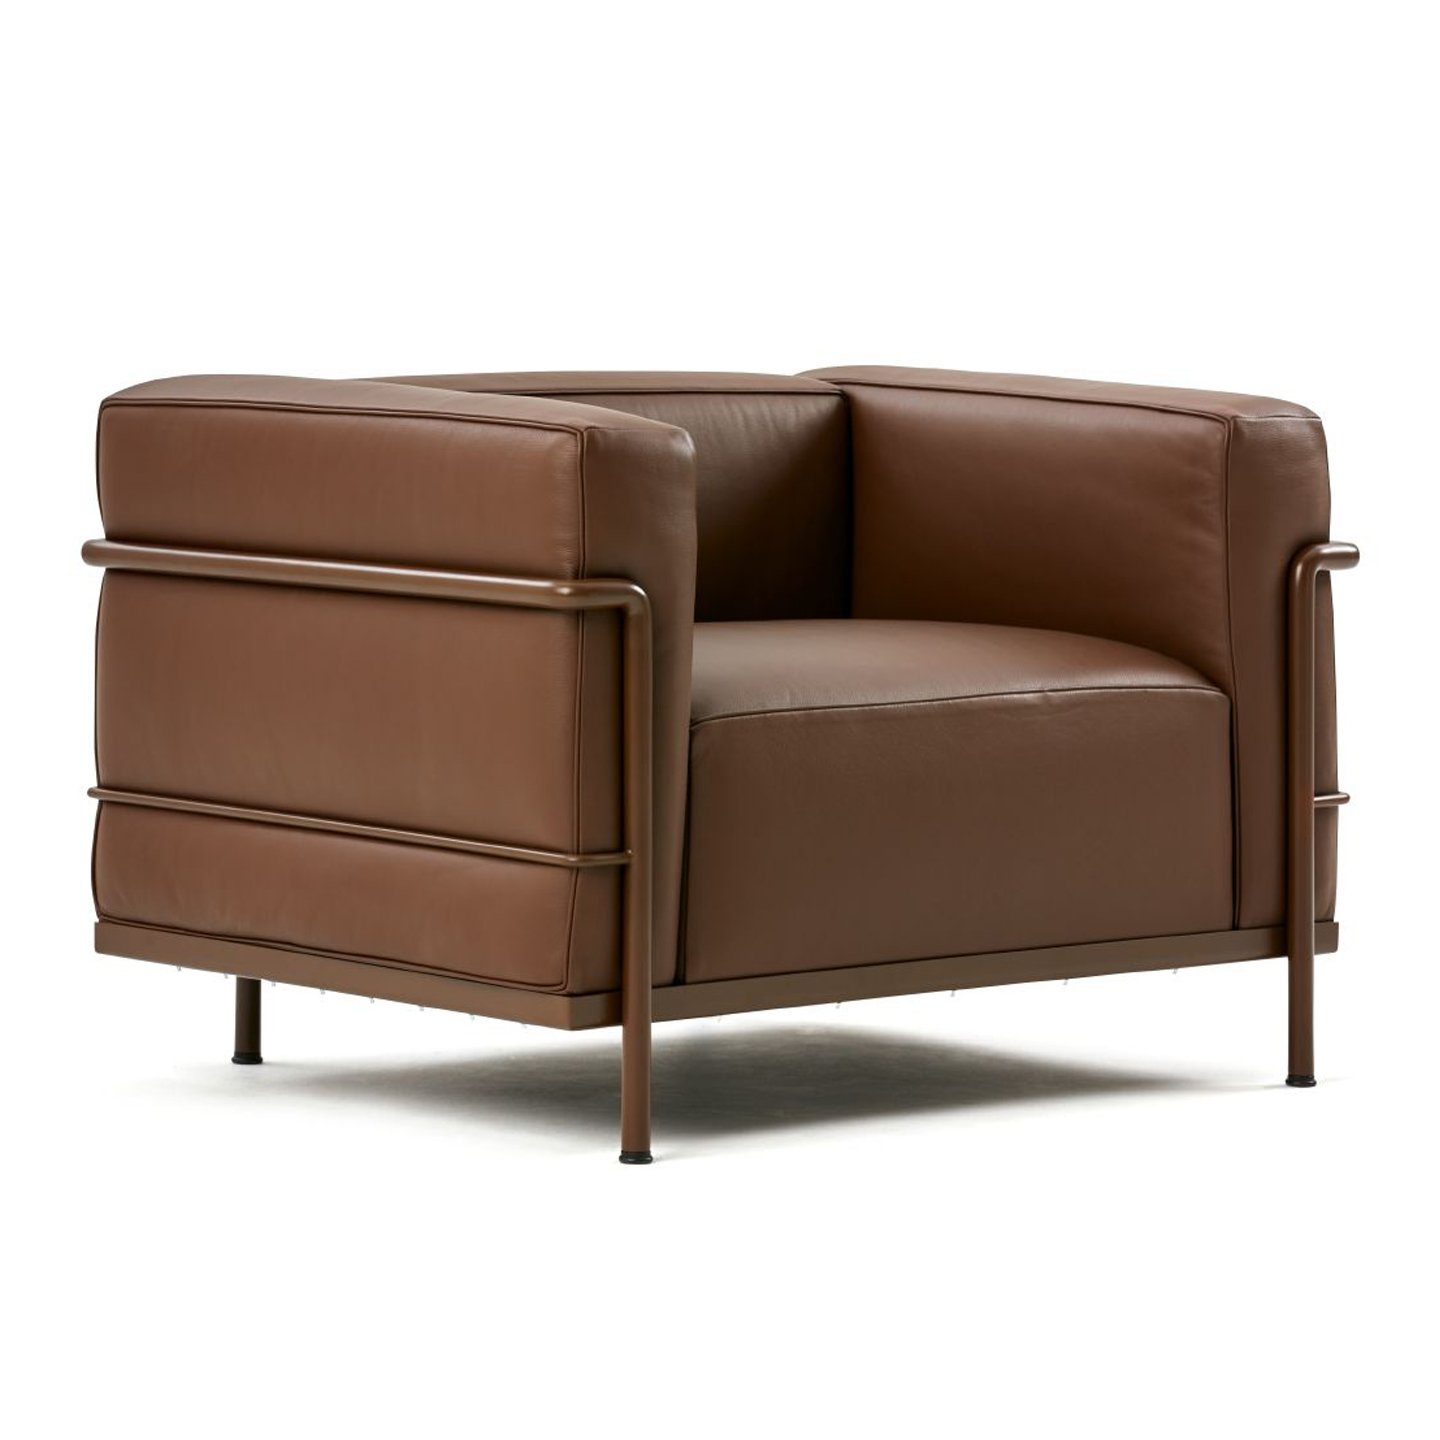 Haworth LC3 lounge chair in brown leather